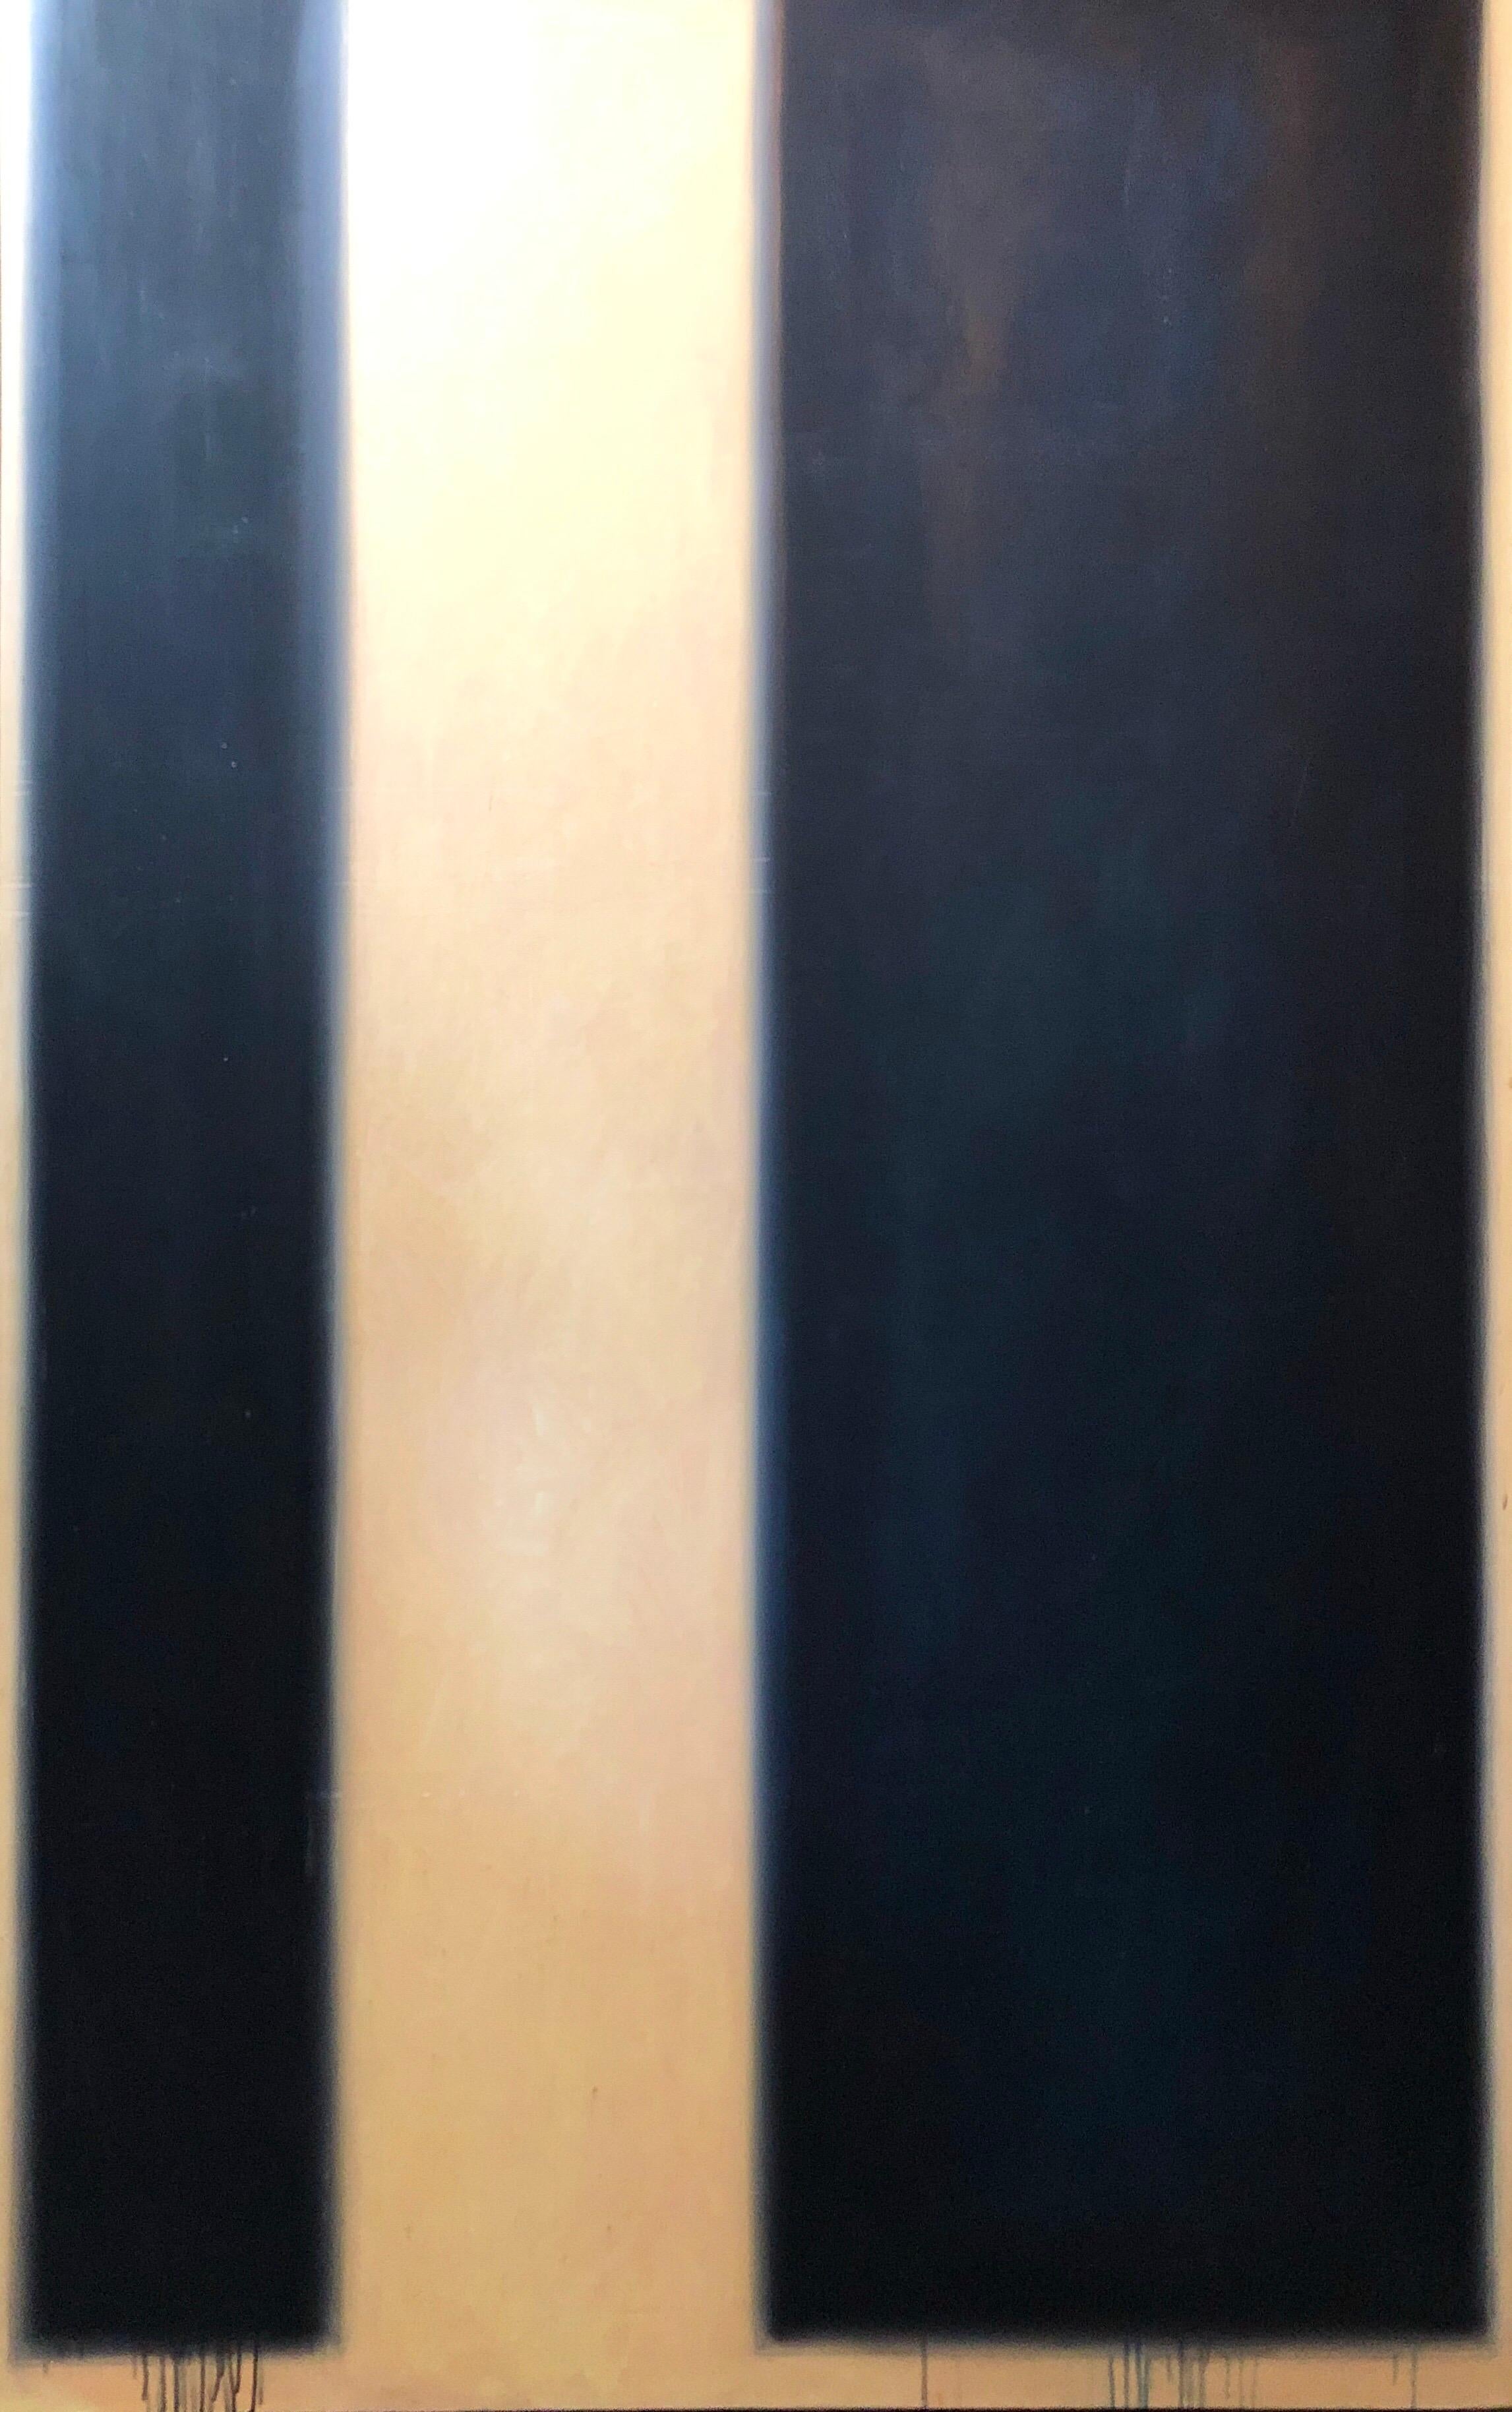 Large painting titled Edge on Center; signed verso and dated 2002  8 feet x 5 feet (approx.)

Peter Lodato was born in 1946 in Los Angeles, California, has exhibited extensively and received significant acclaim throughout his art career.  During the